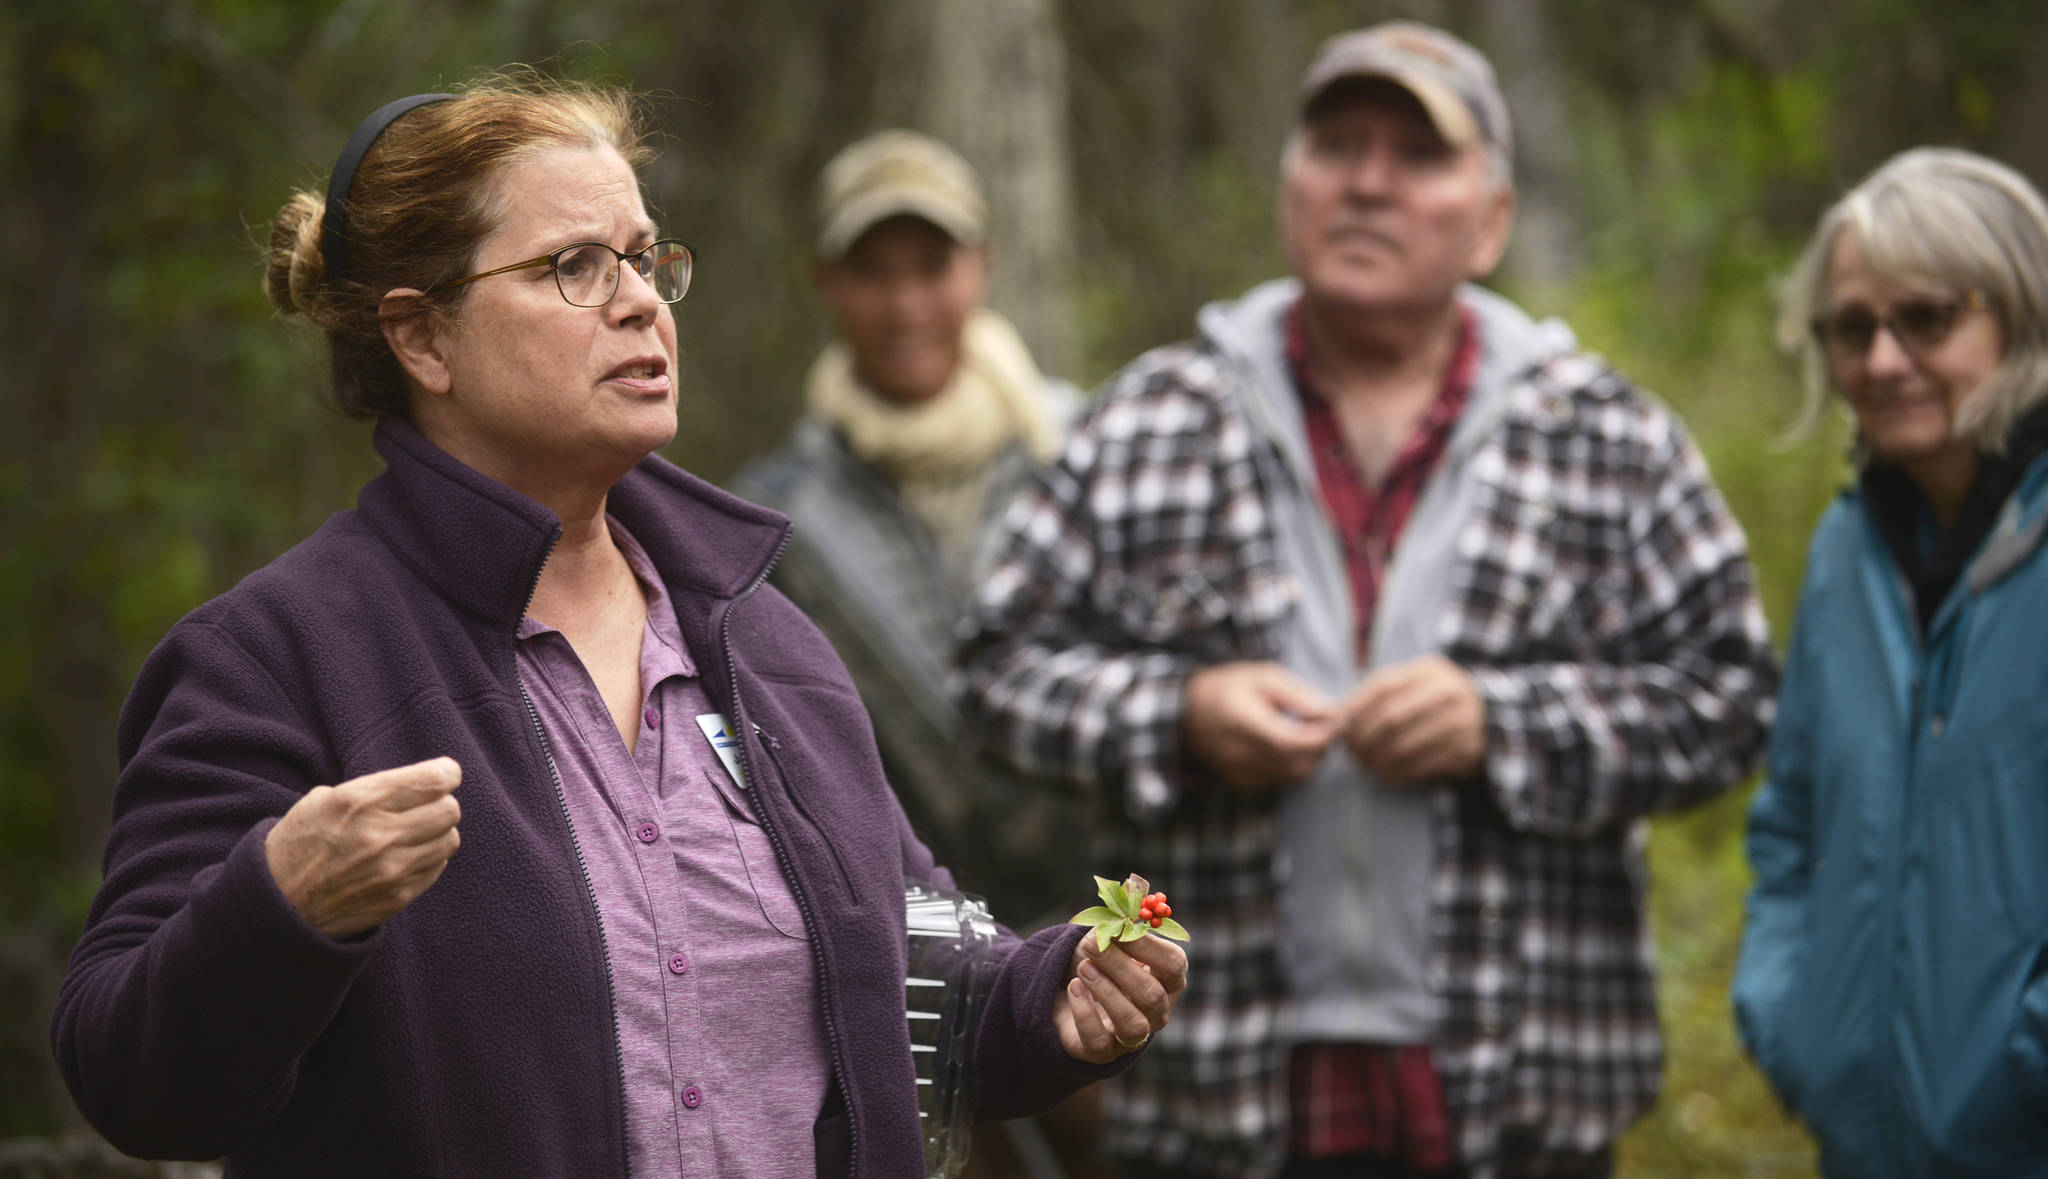 Leading a group of berry seekers, Janice Chumley of the University of Alaska Fairbanks Cooperative Extension Service contrasts the tasty lingonberry (also known as lowbush cranberries) with the “edible but insipid” specimen of bunchberry dogwood in her right hand during an instructional walk on Monday, August 28, 2017 at Tsalteshi Trails near Soldotna, Alaska. The event was part of the fifth annual Harvest Moon Local Food Festival, which concluded Monday.